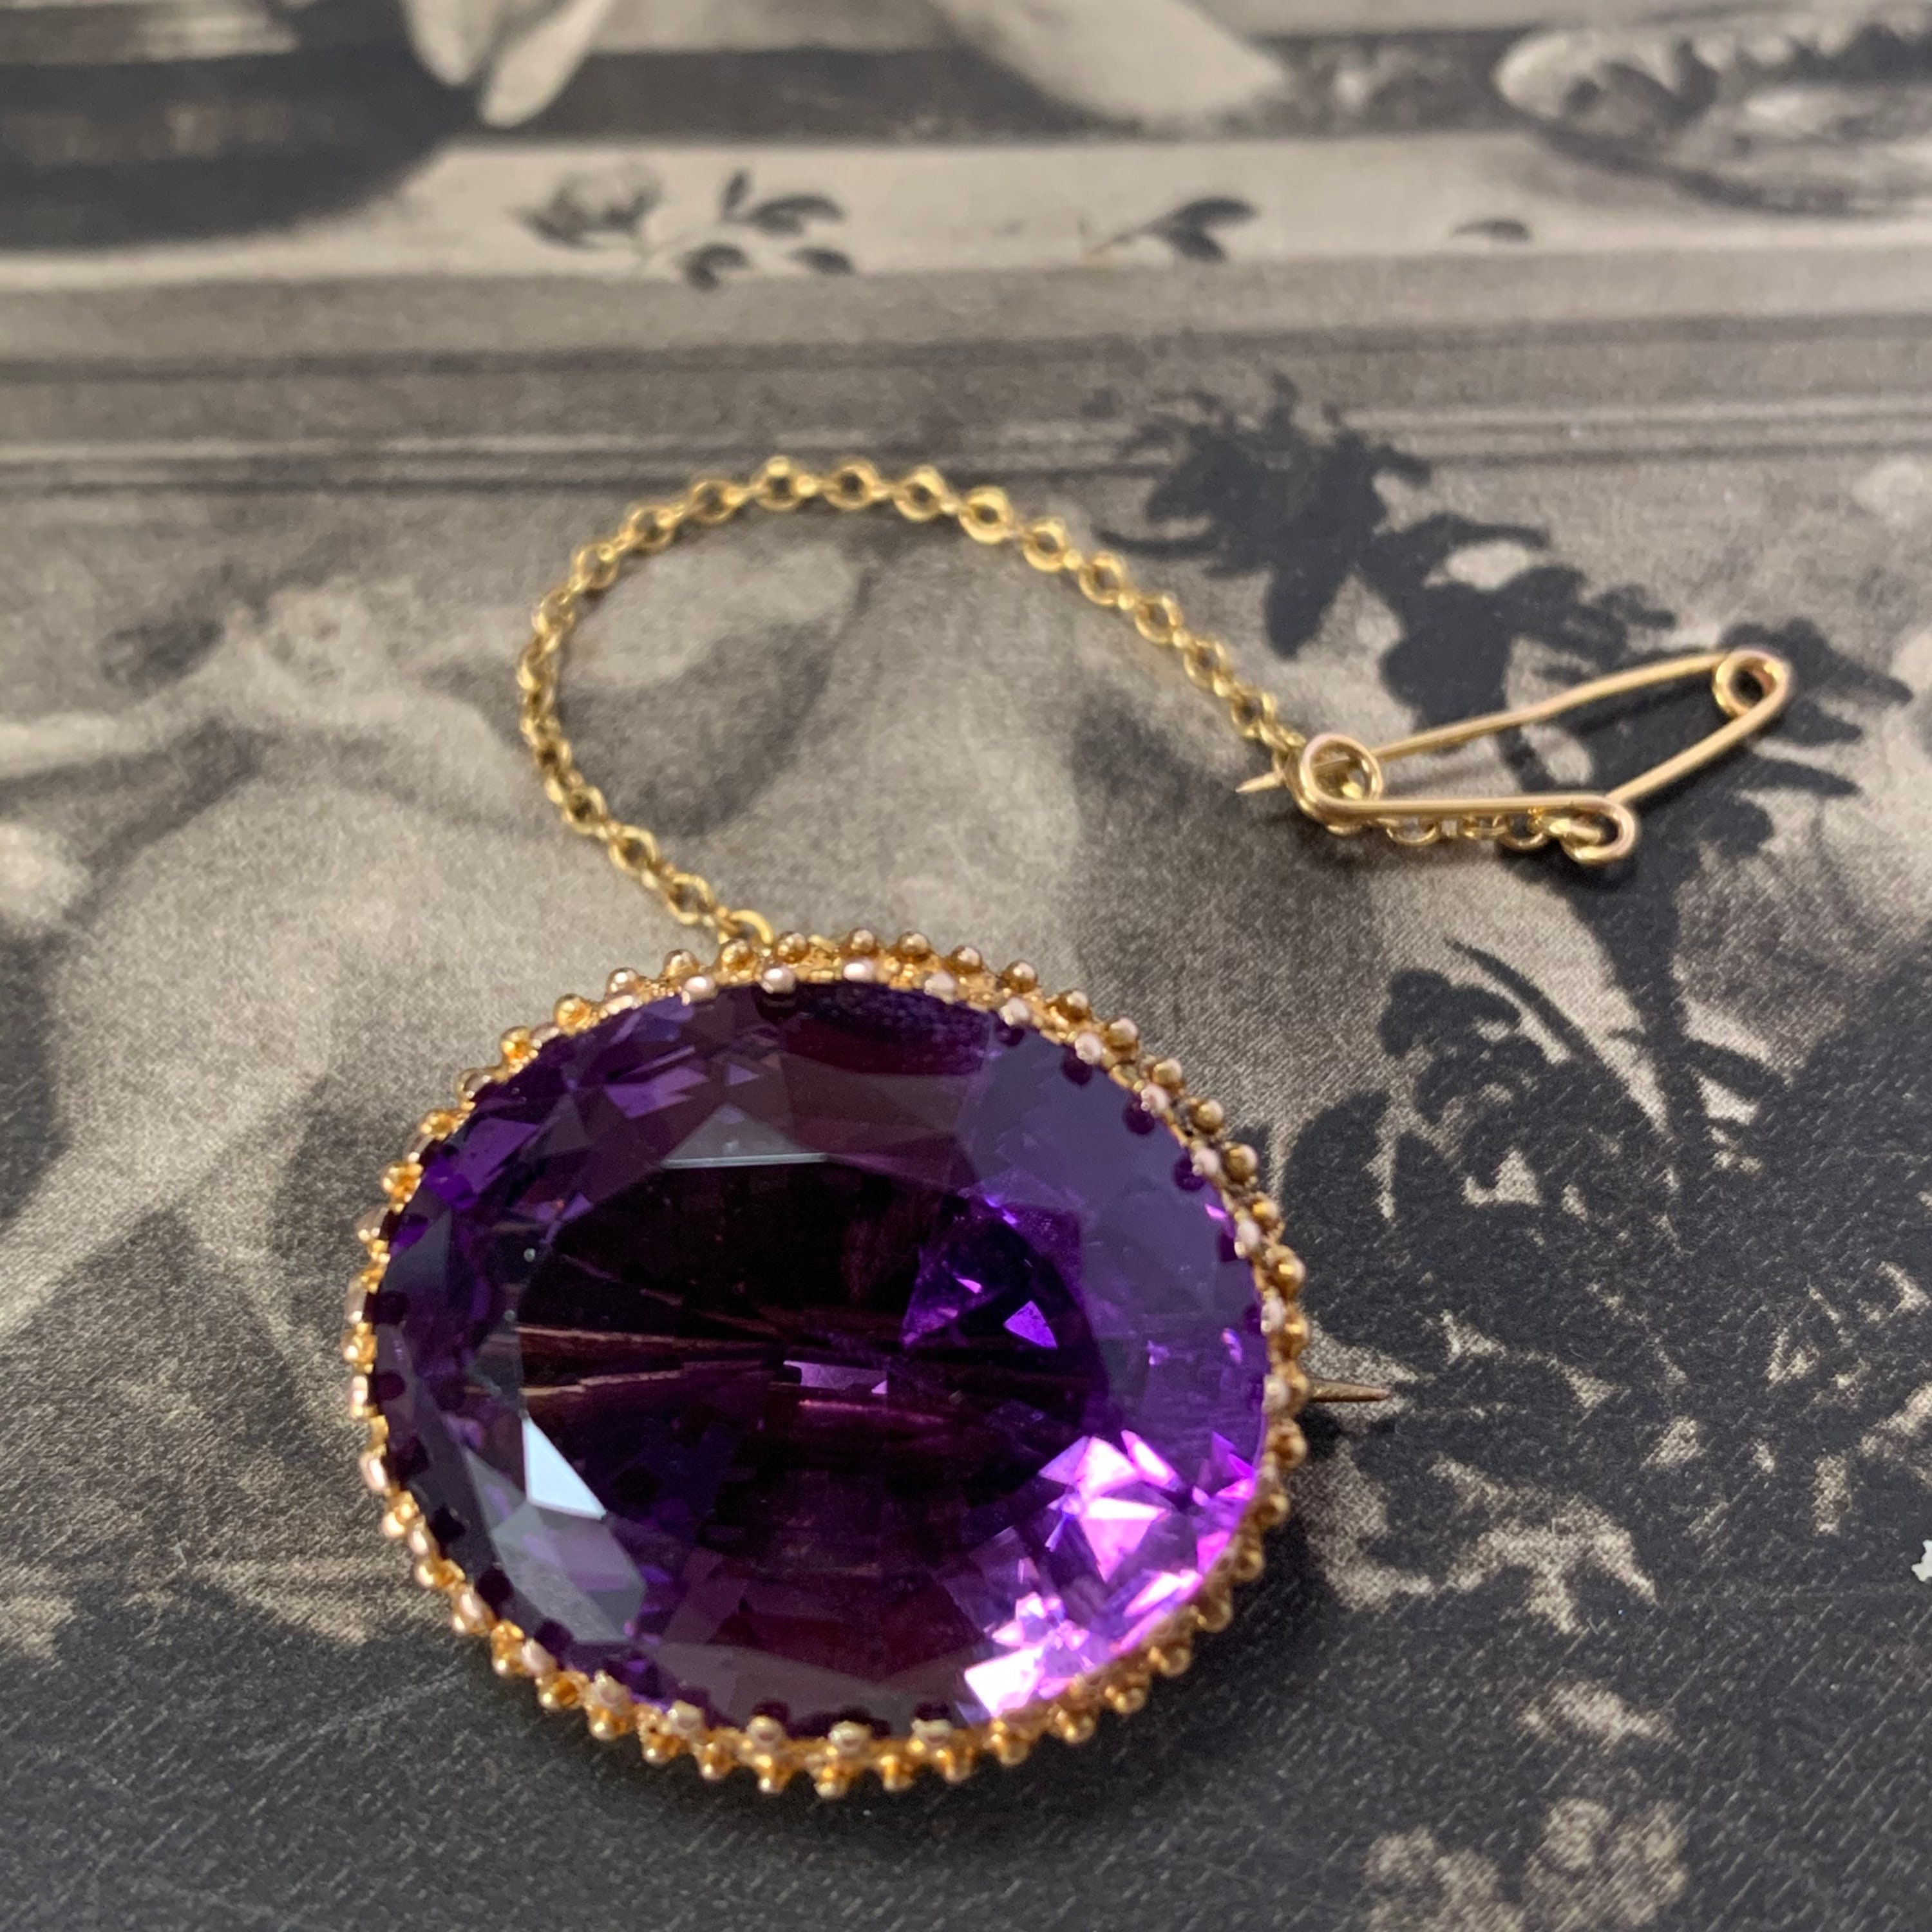 Victorian Amethyst Brooch. Beautiful 22Ct Gold Setting With A 18Tcw Oval Purple Gemstone